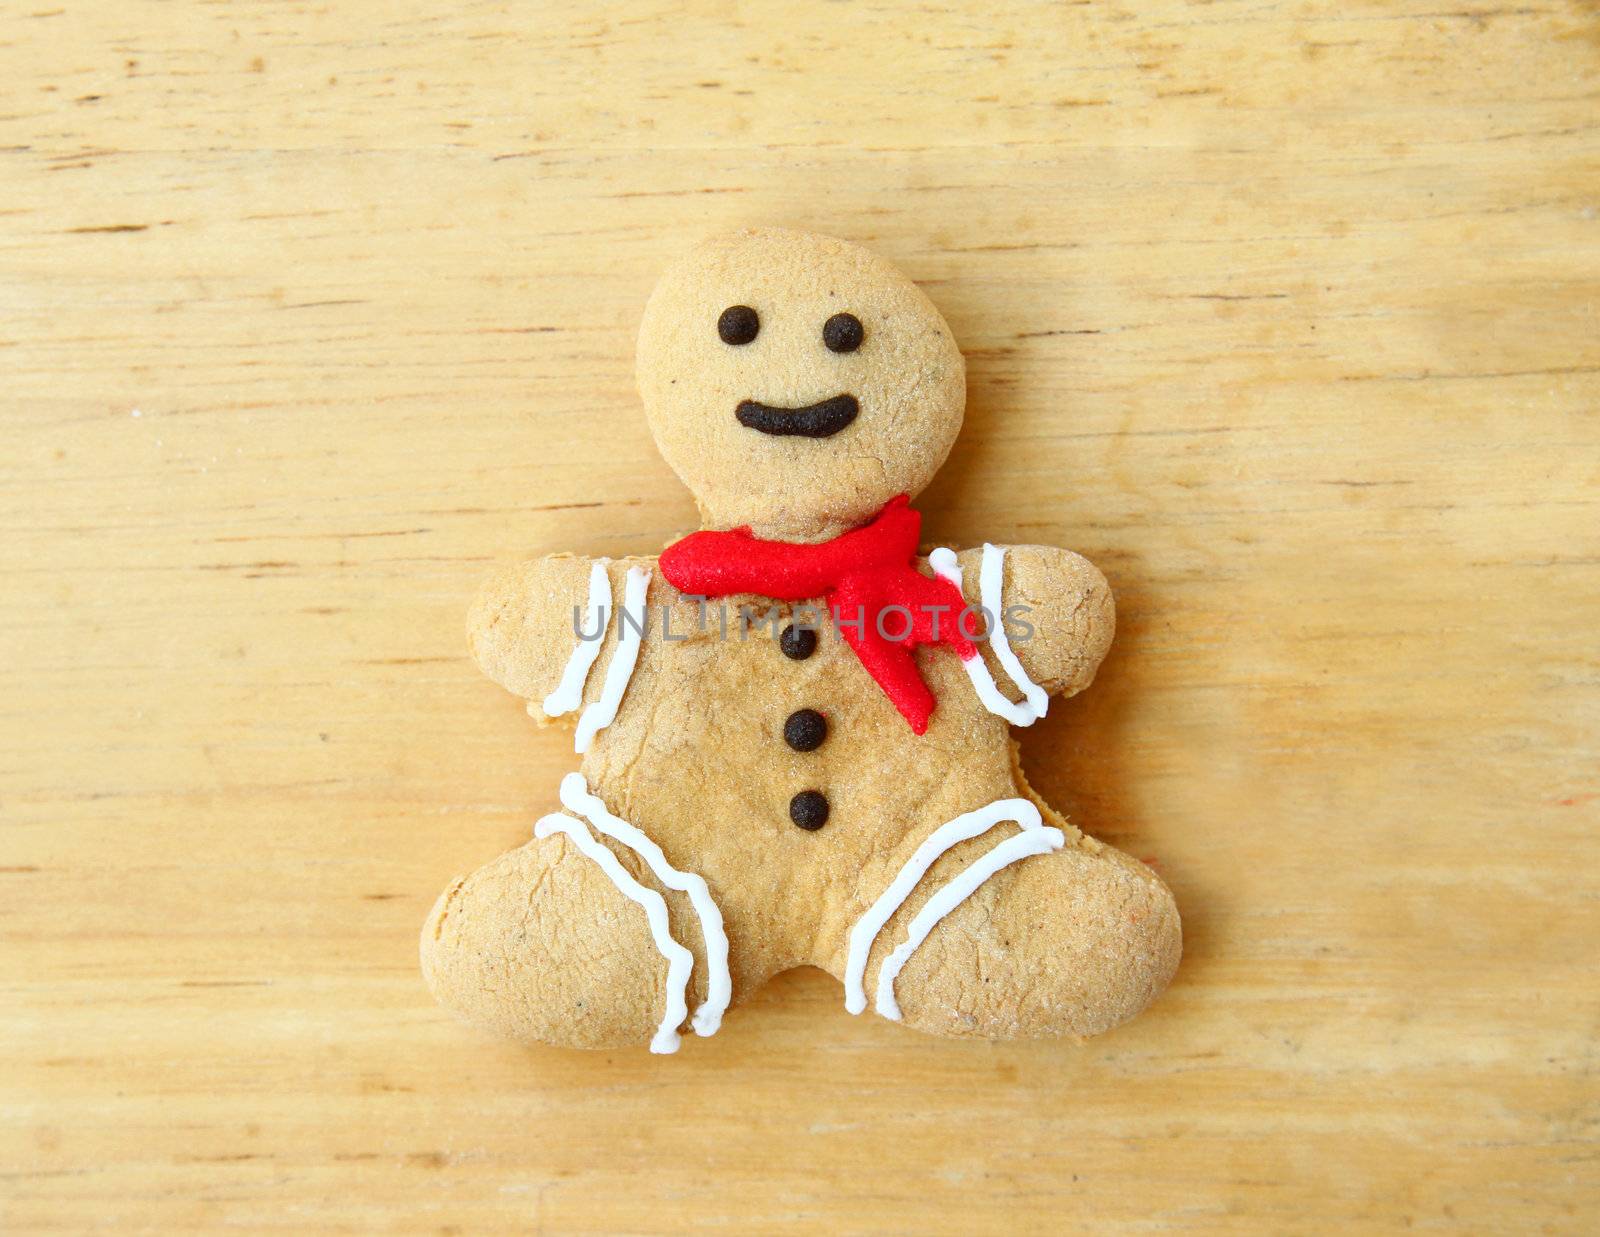 Gingerbread man on wooden background by nuchylee